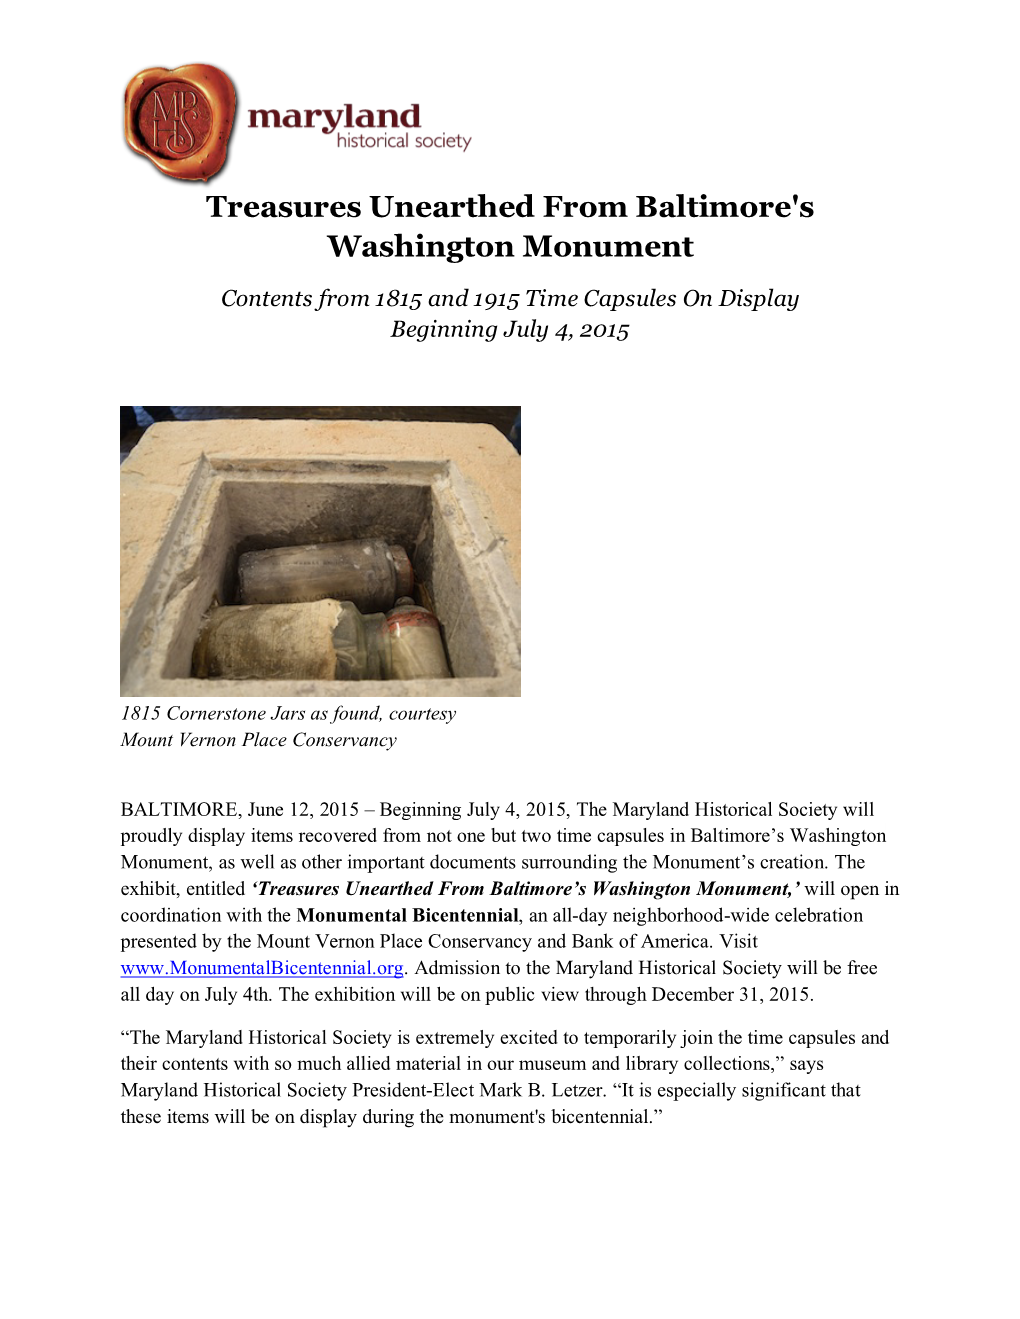 Treasures Unearthed from Baltimore's Washington Monument